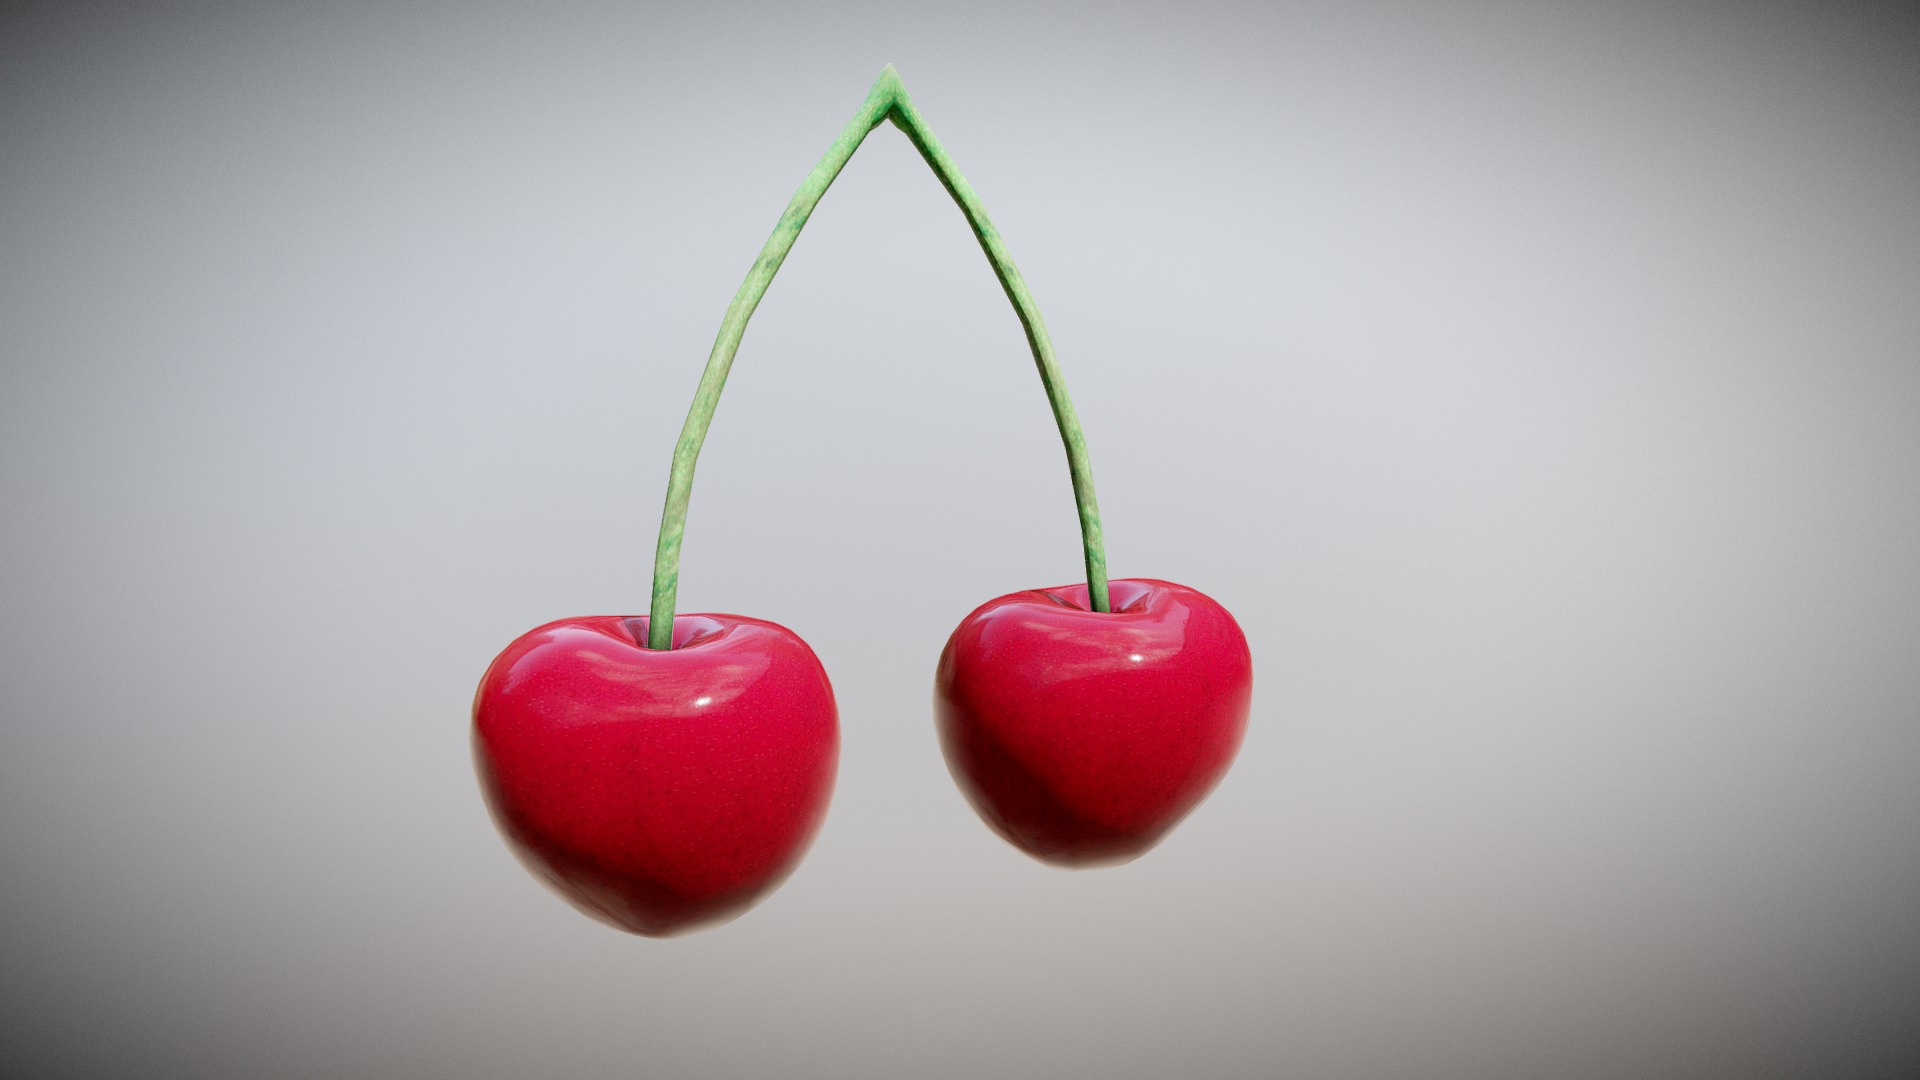 3D model Cherry - This is a 3D model of the Cherry. The 3D model is about cherries with stems coming out of them.